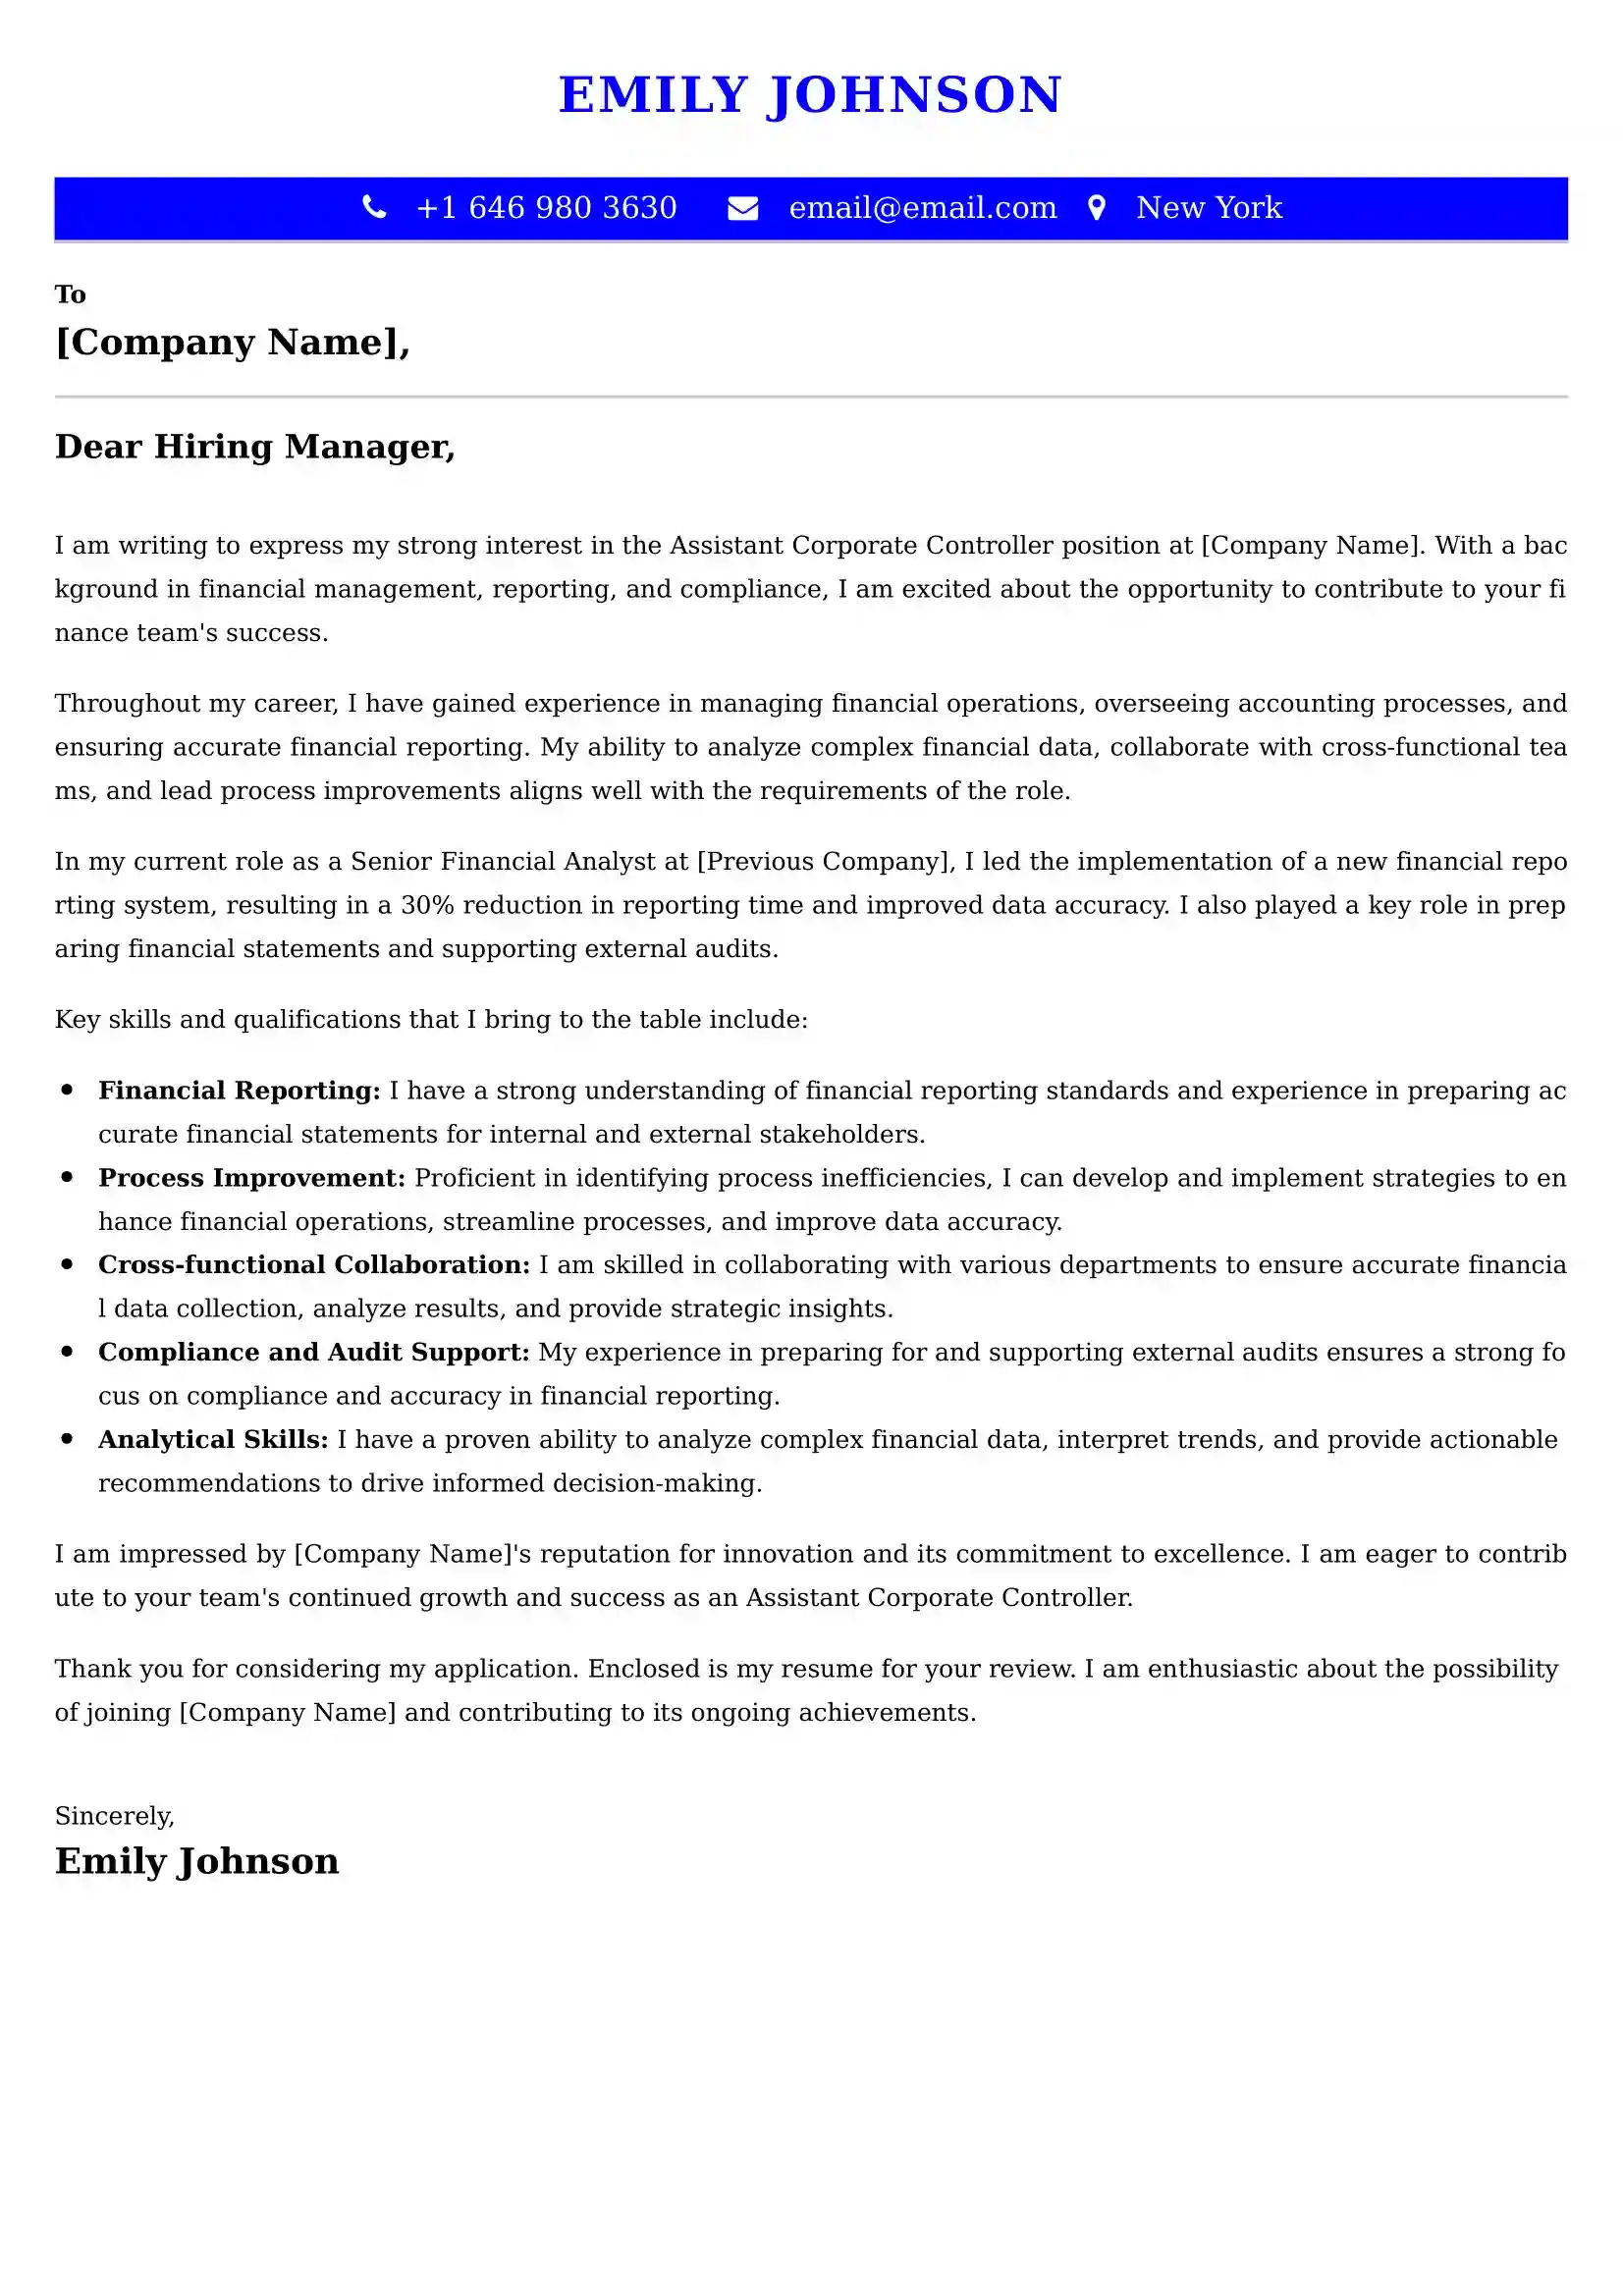 Assistant Corporate Controller Cover Letter Examples - US Format and Tips